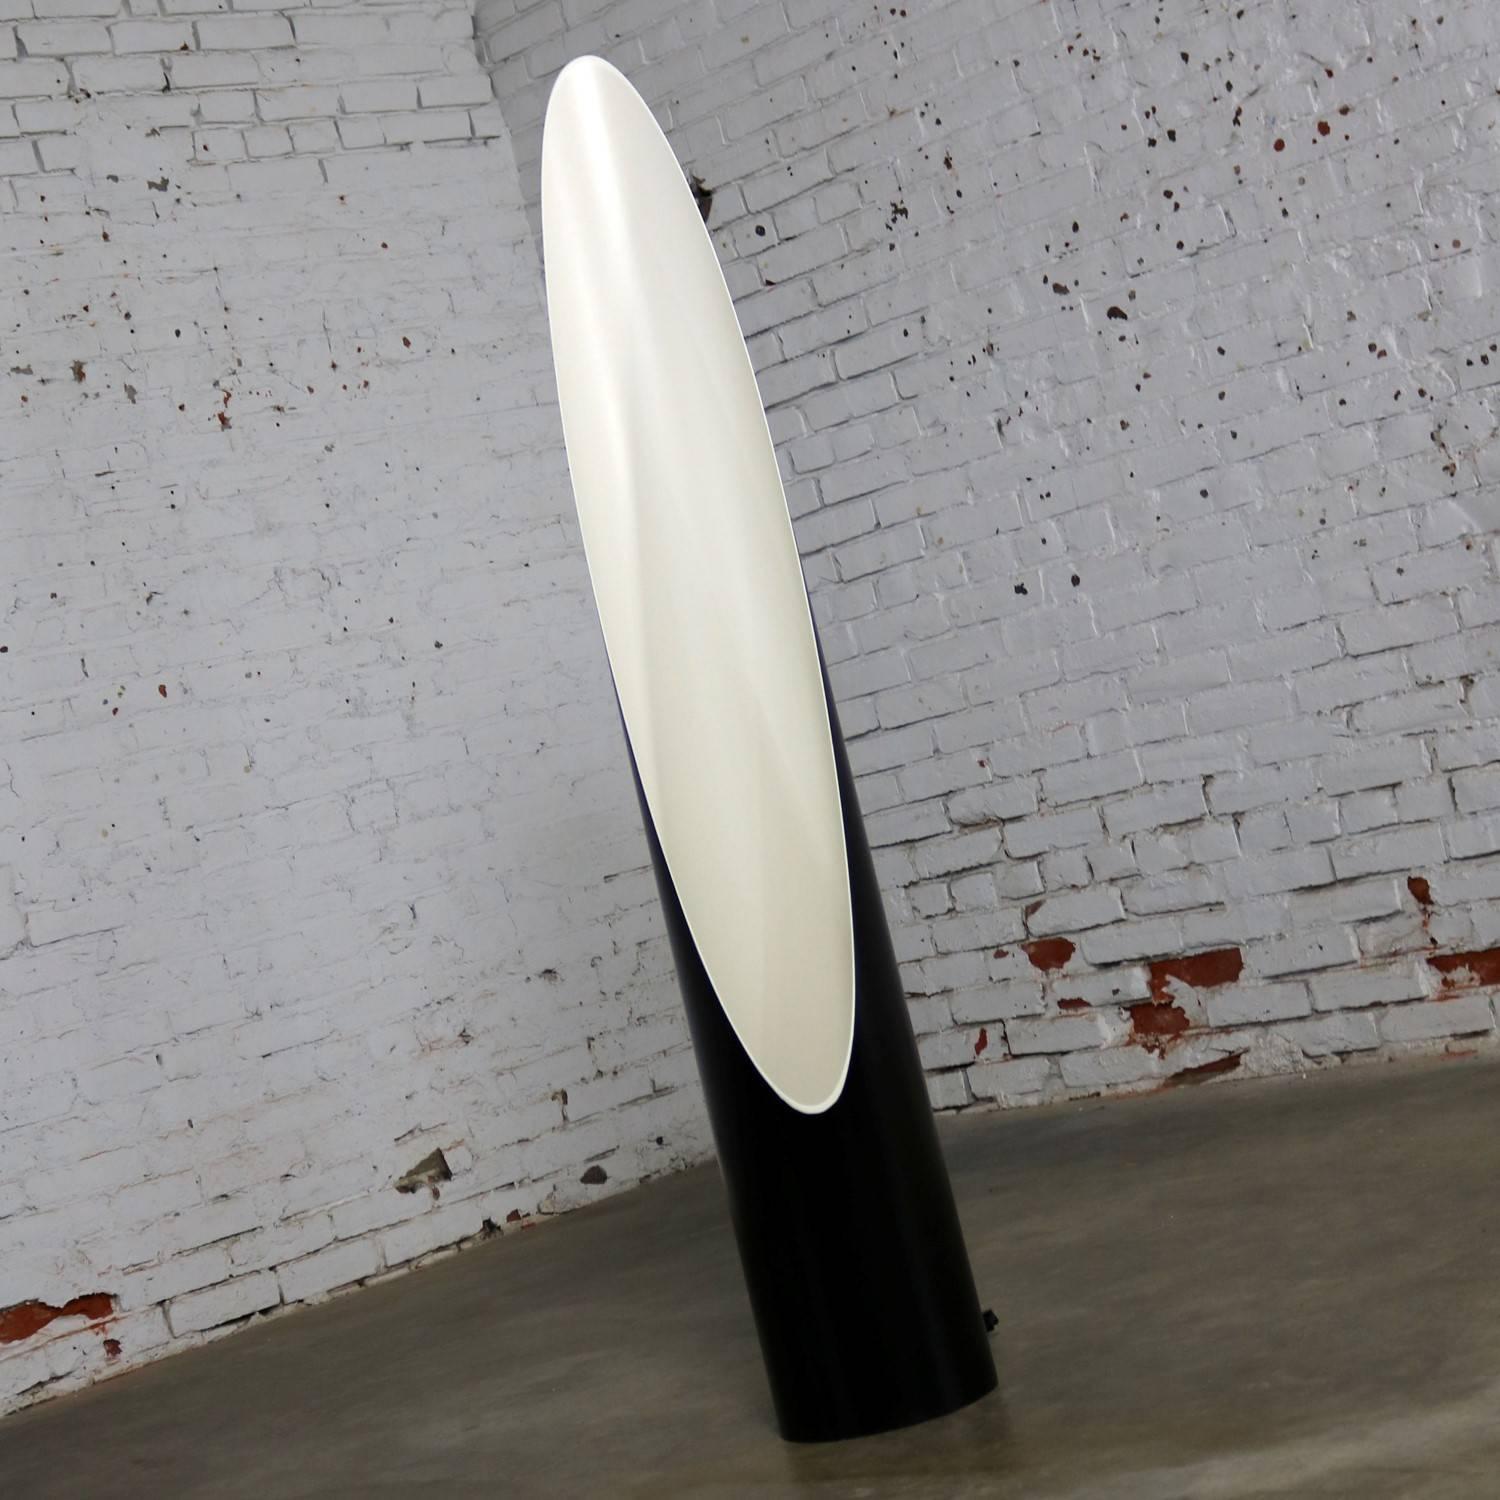 Incredible Mid-Century Modern or contemporary style cylinder floor lamp with a black exterior and a white interior having a diagonally cut opening giving it an elliptical efficacy of light. This lamp is in newly restored condition. circa 20th